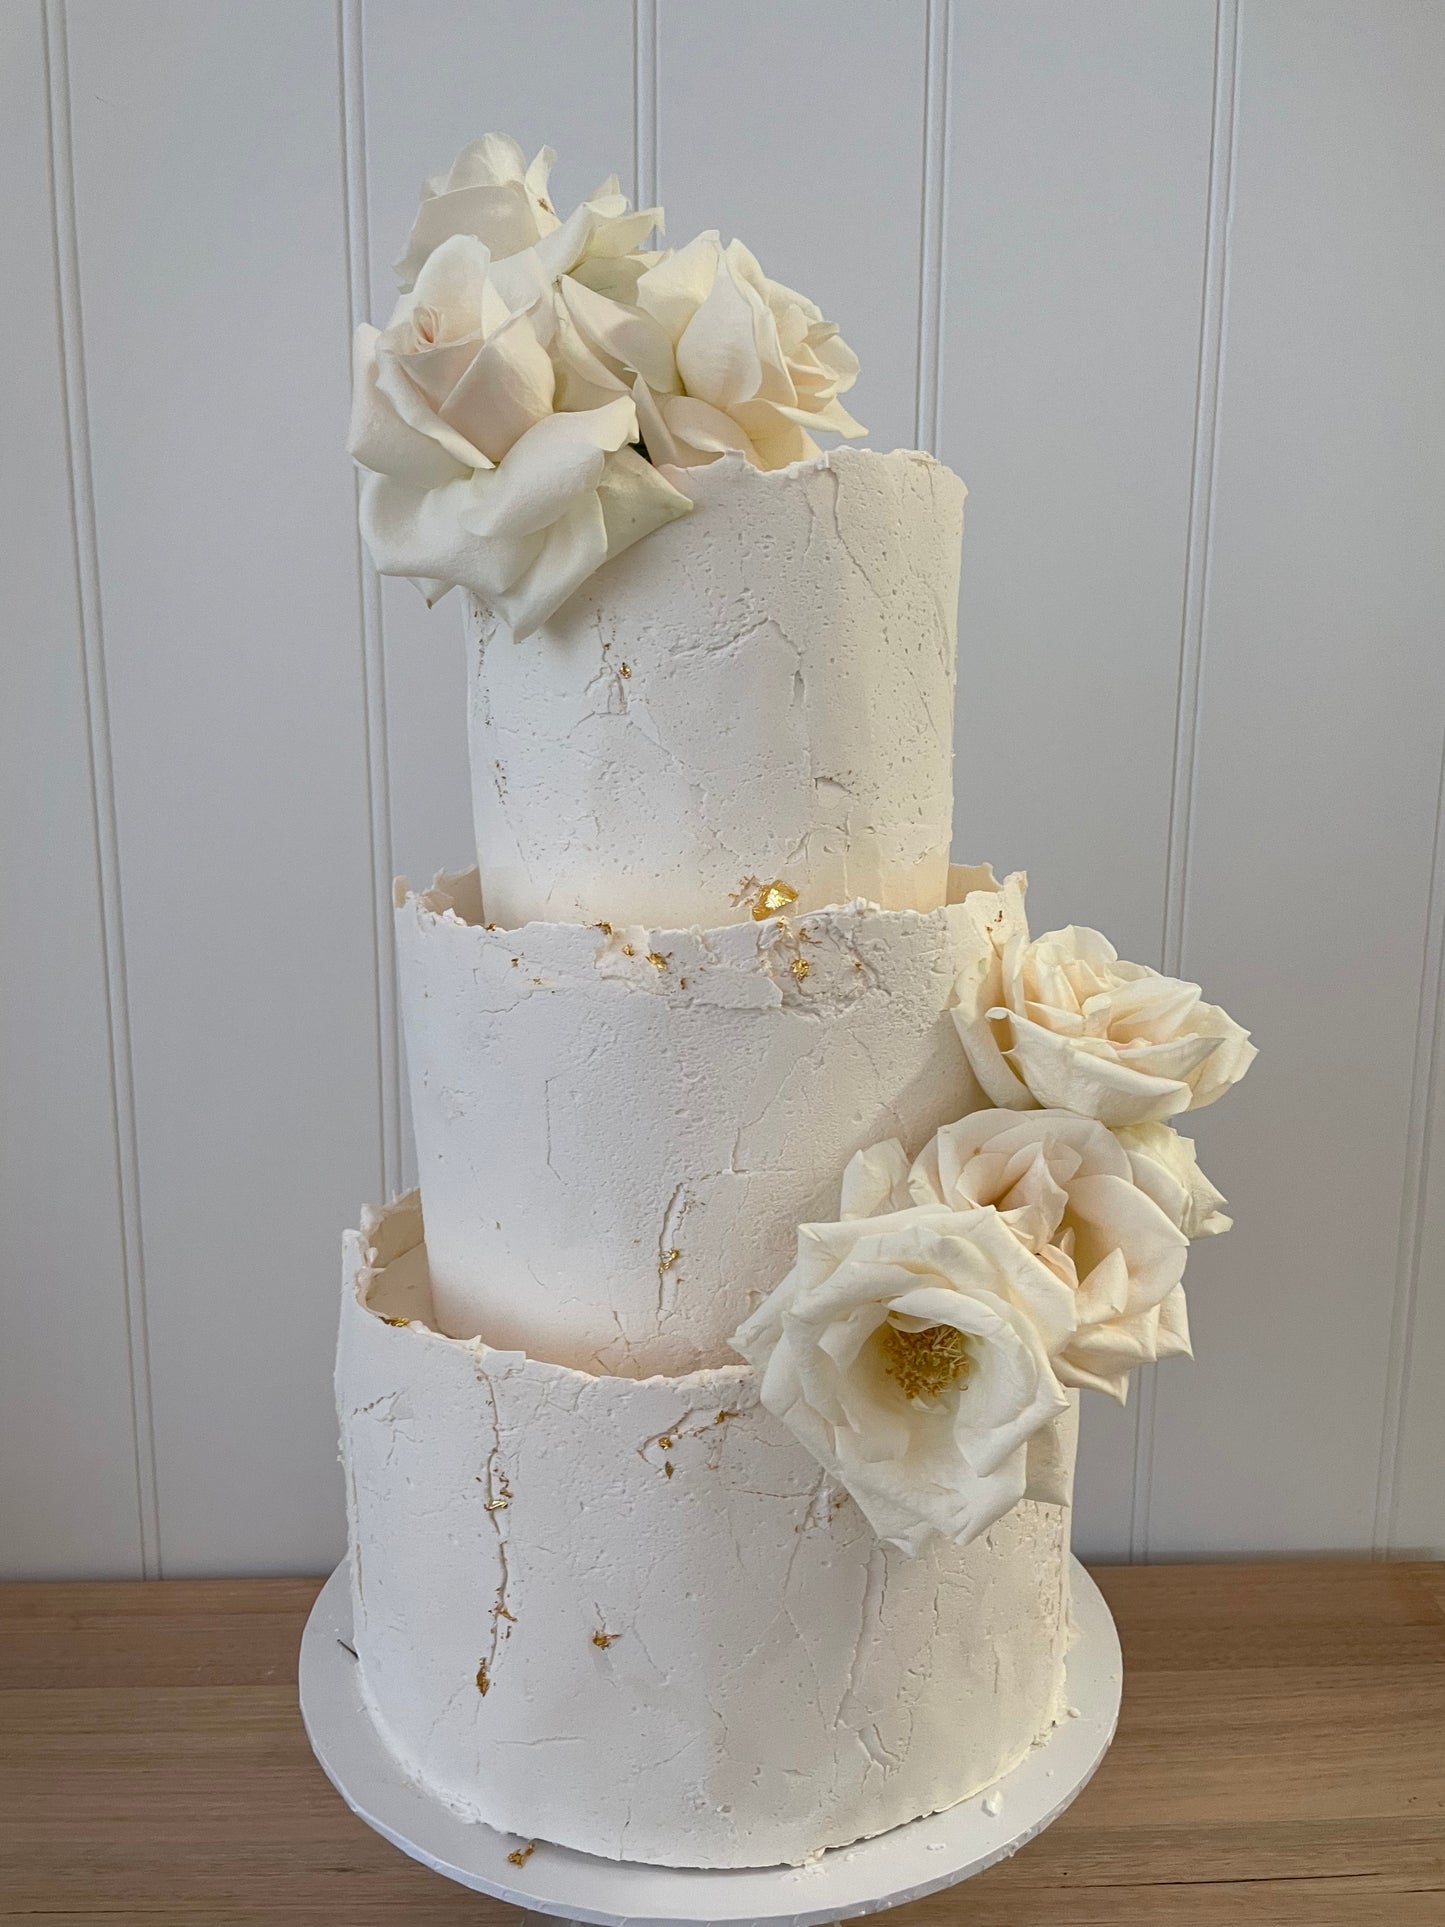 3 Tier Contemporary Buttercream cake with white flowers